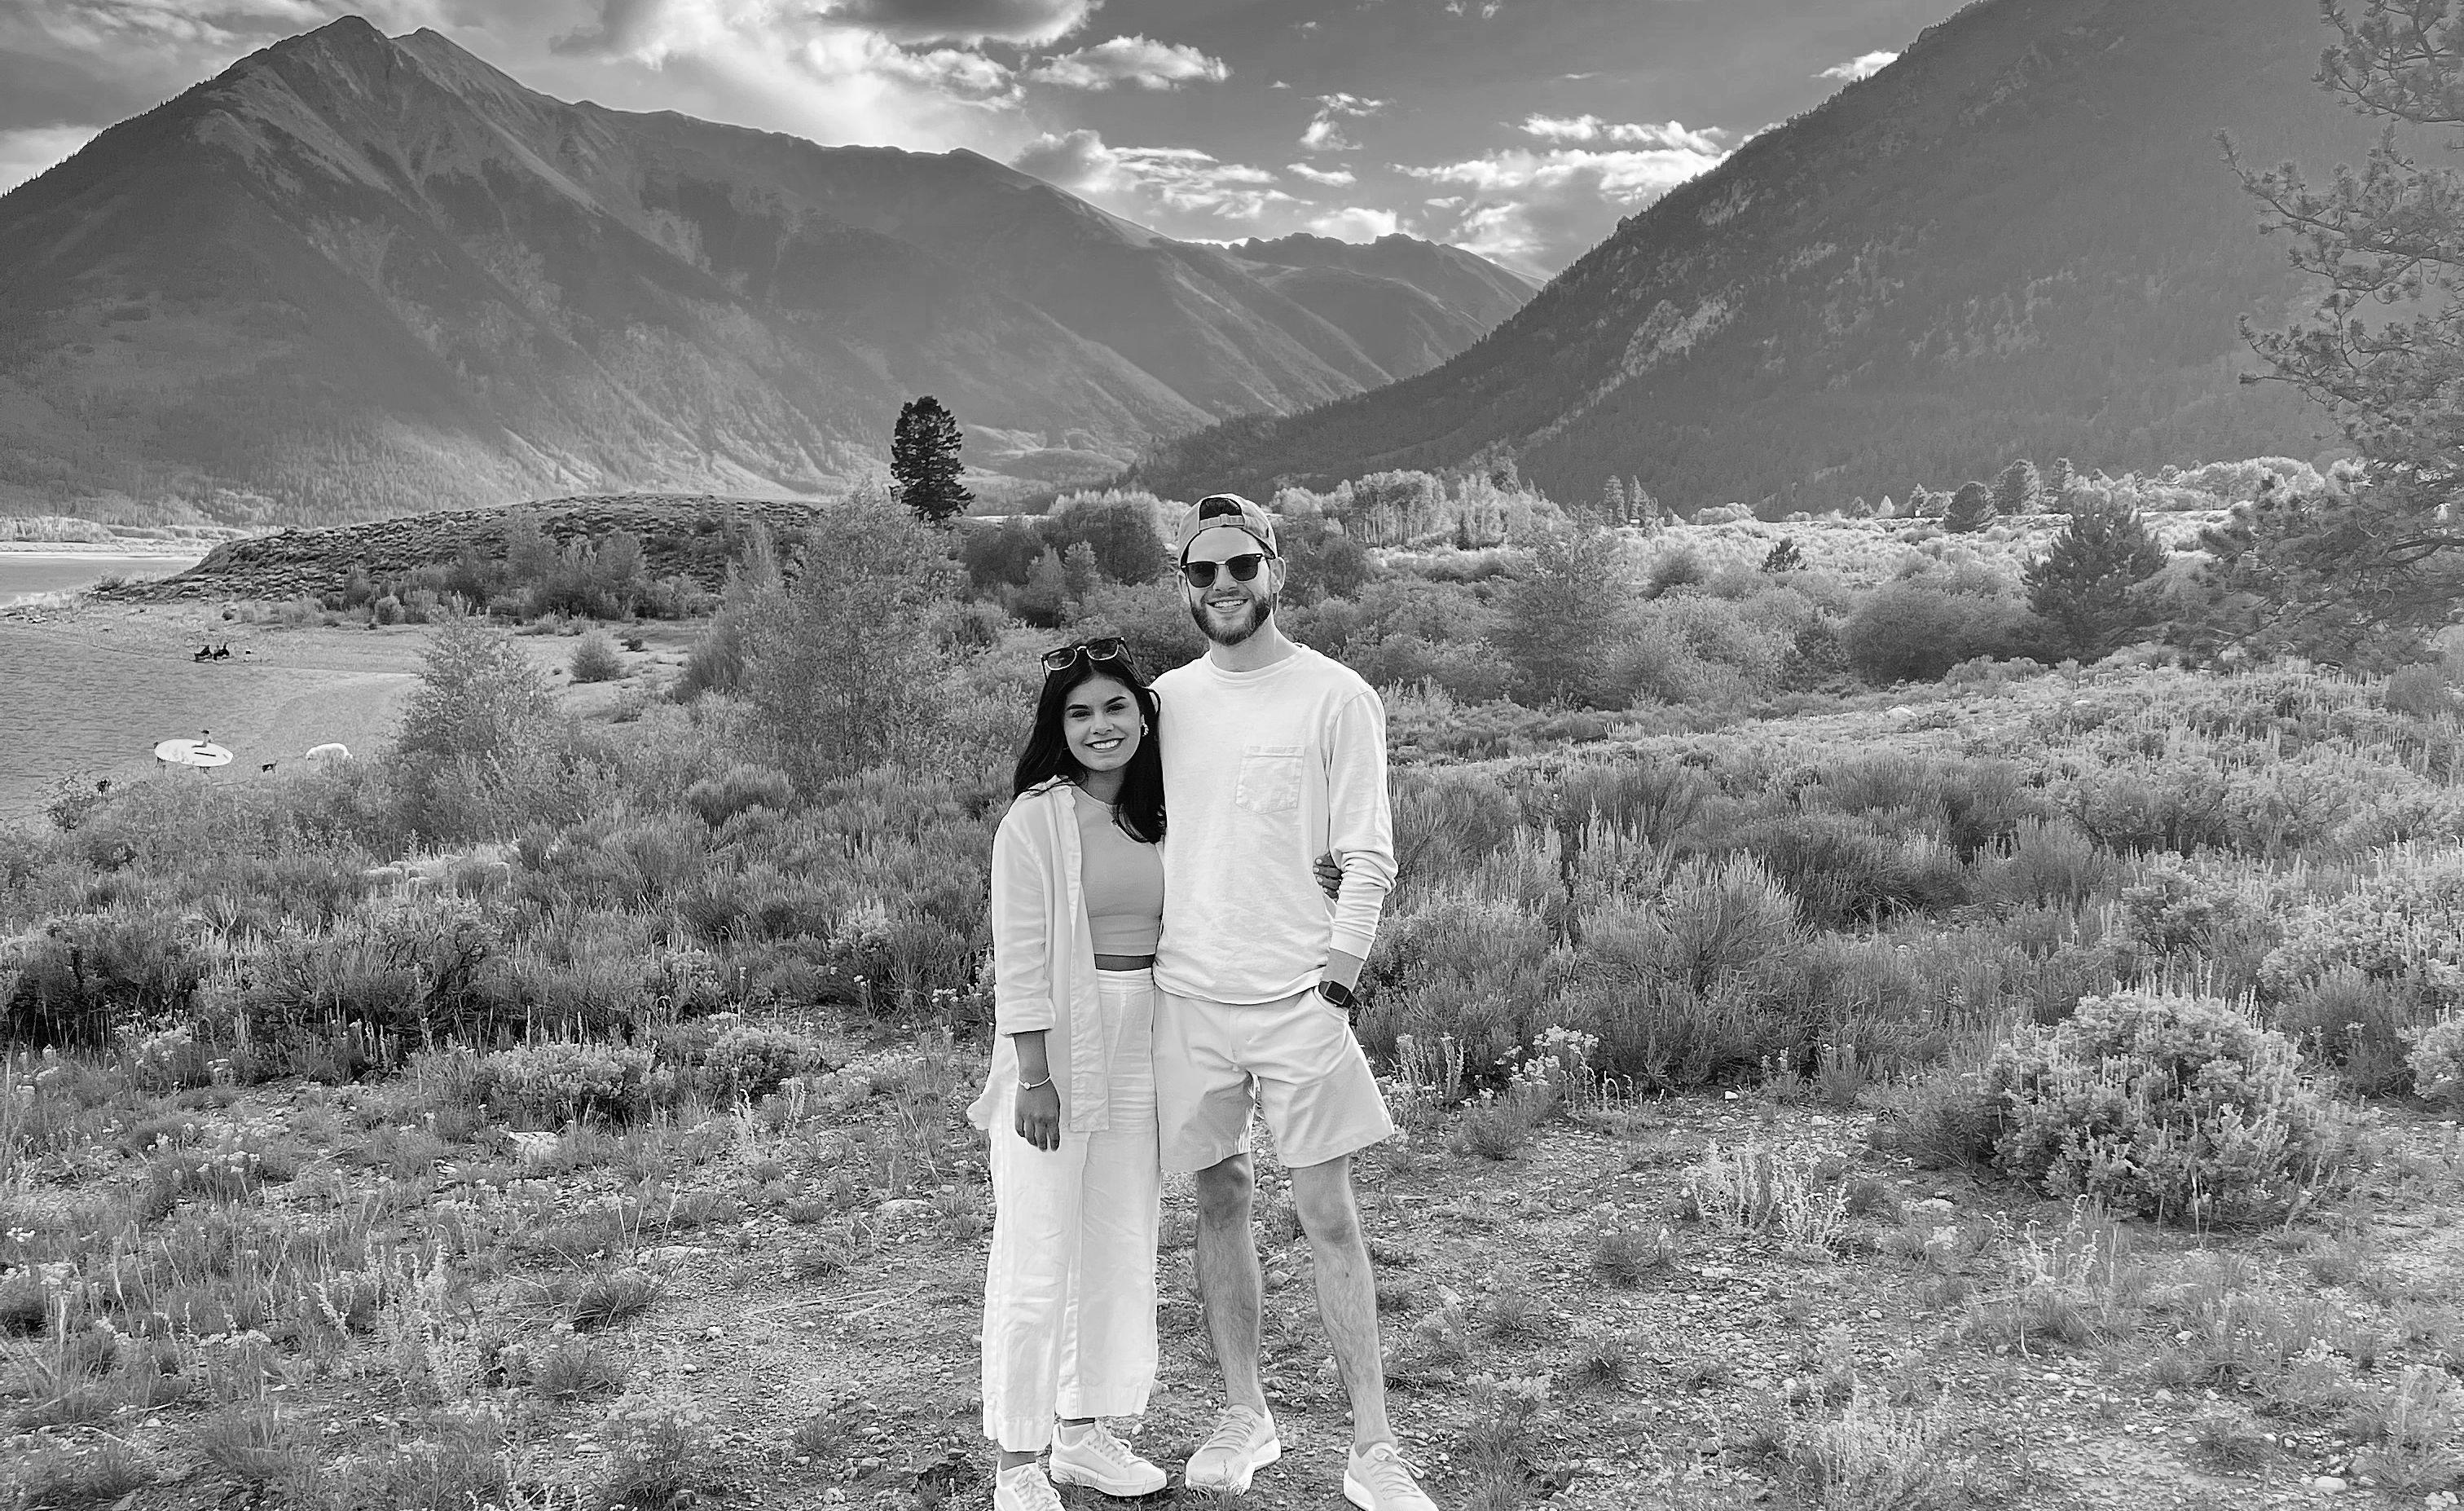 The Wedding Website of Khushboo Parmar and Joshua Cass